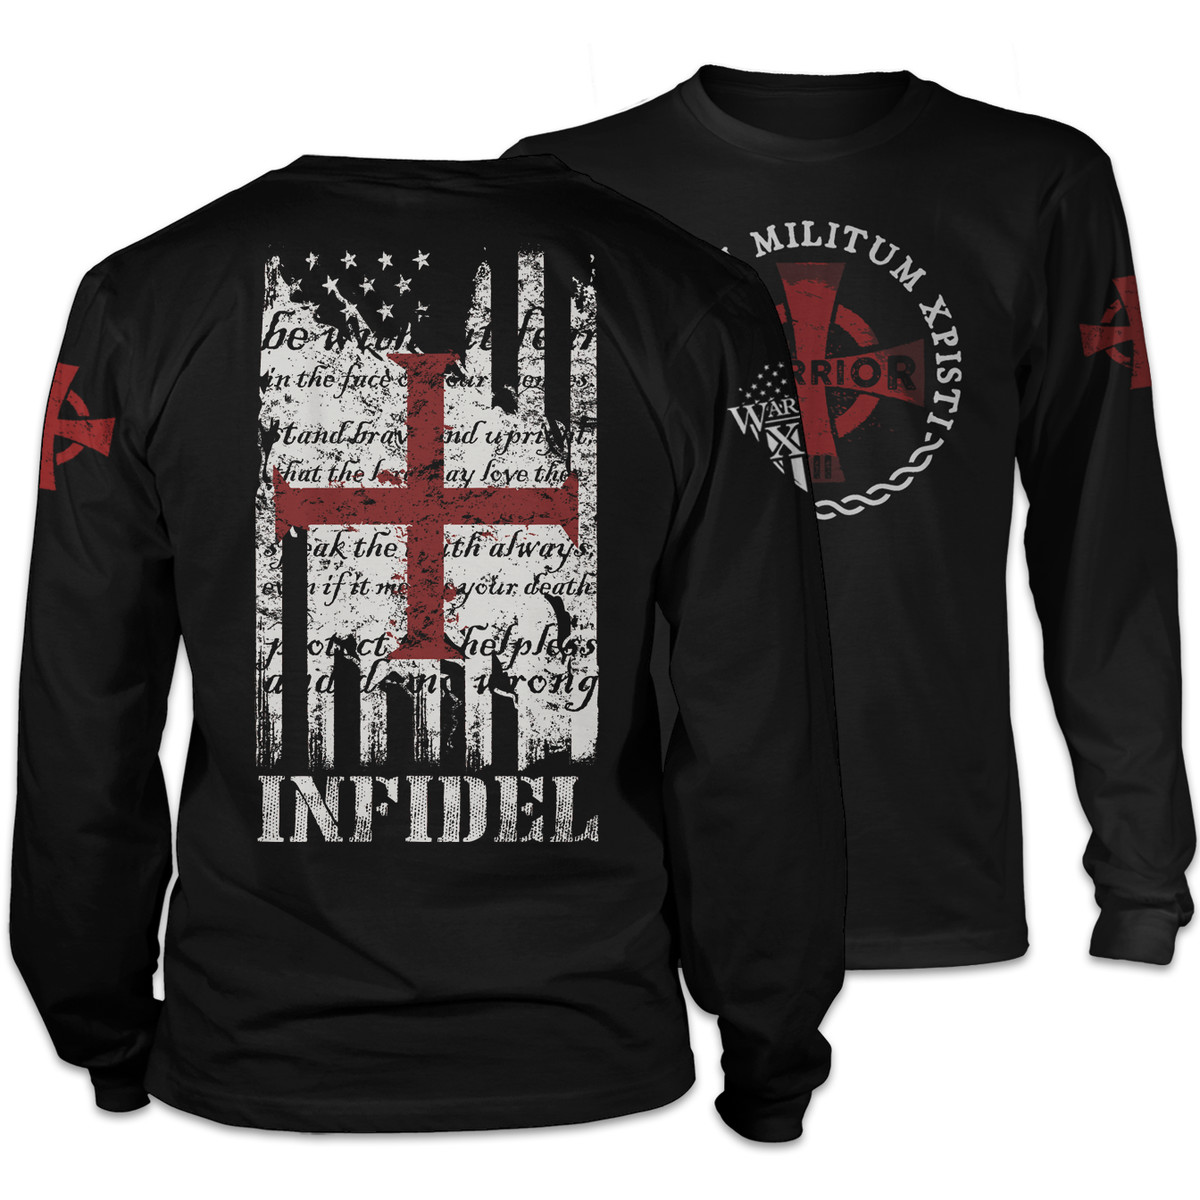 Front & back black Long sleeve shirt with the "the American and Templar flag" printed on the shirt.